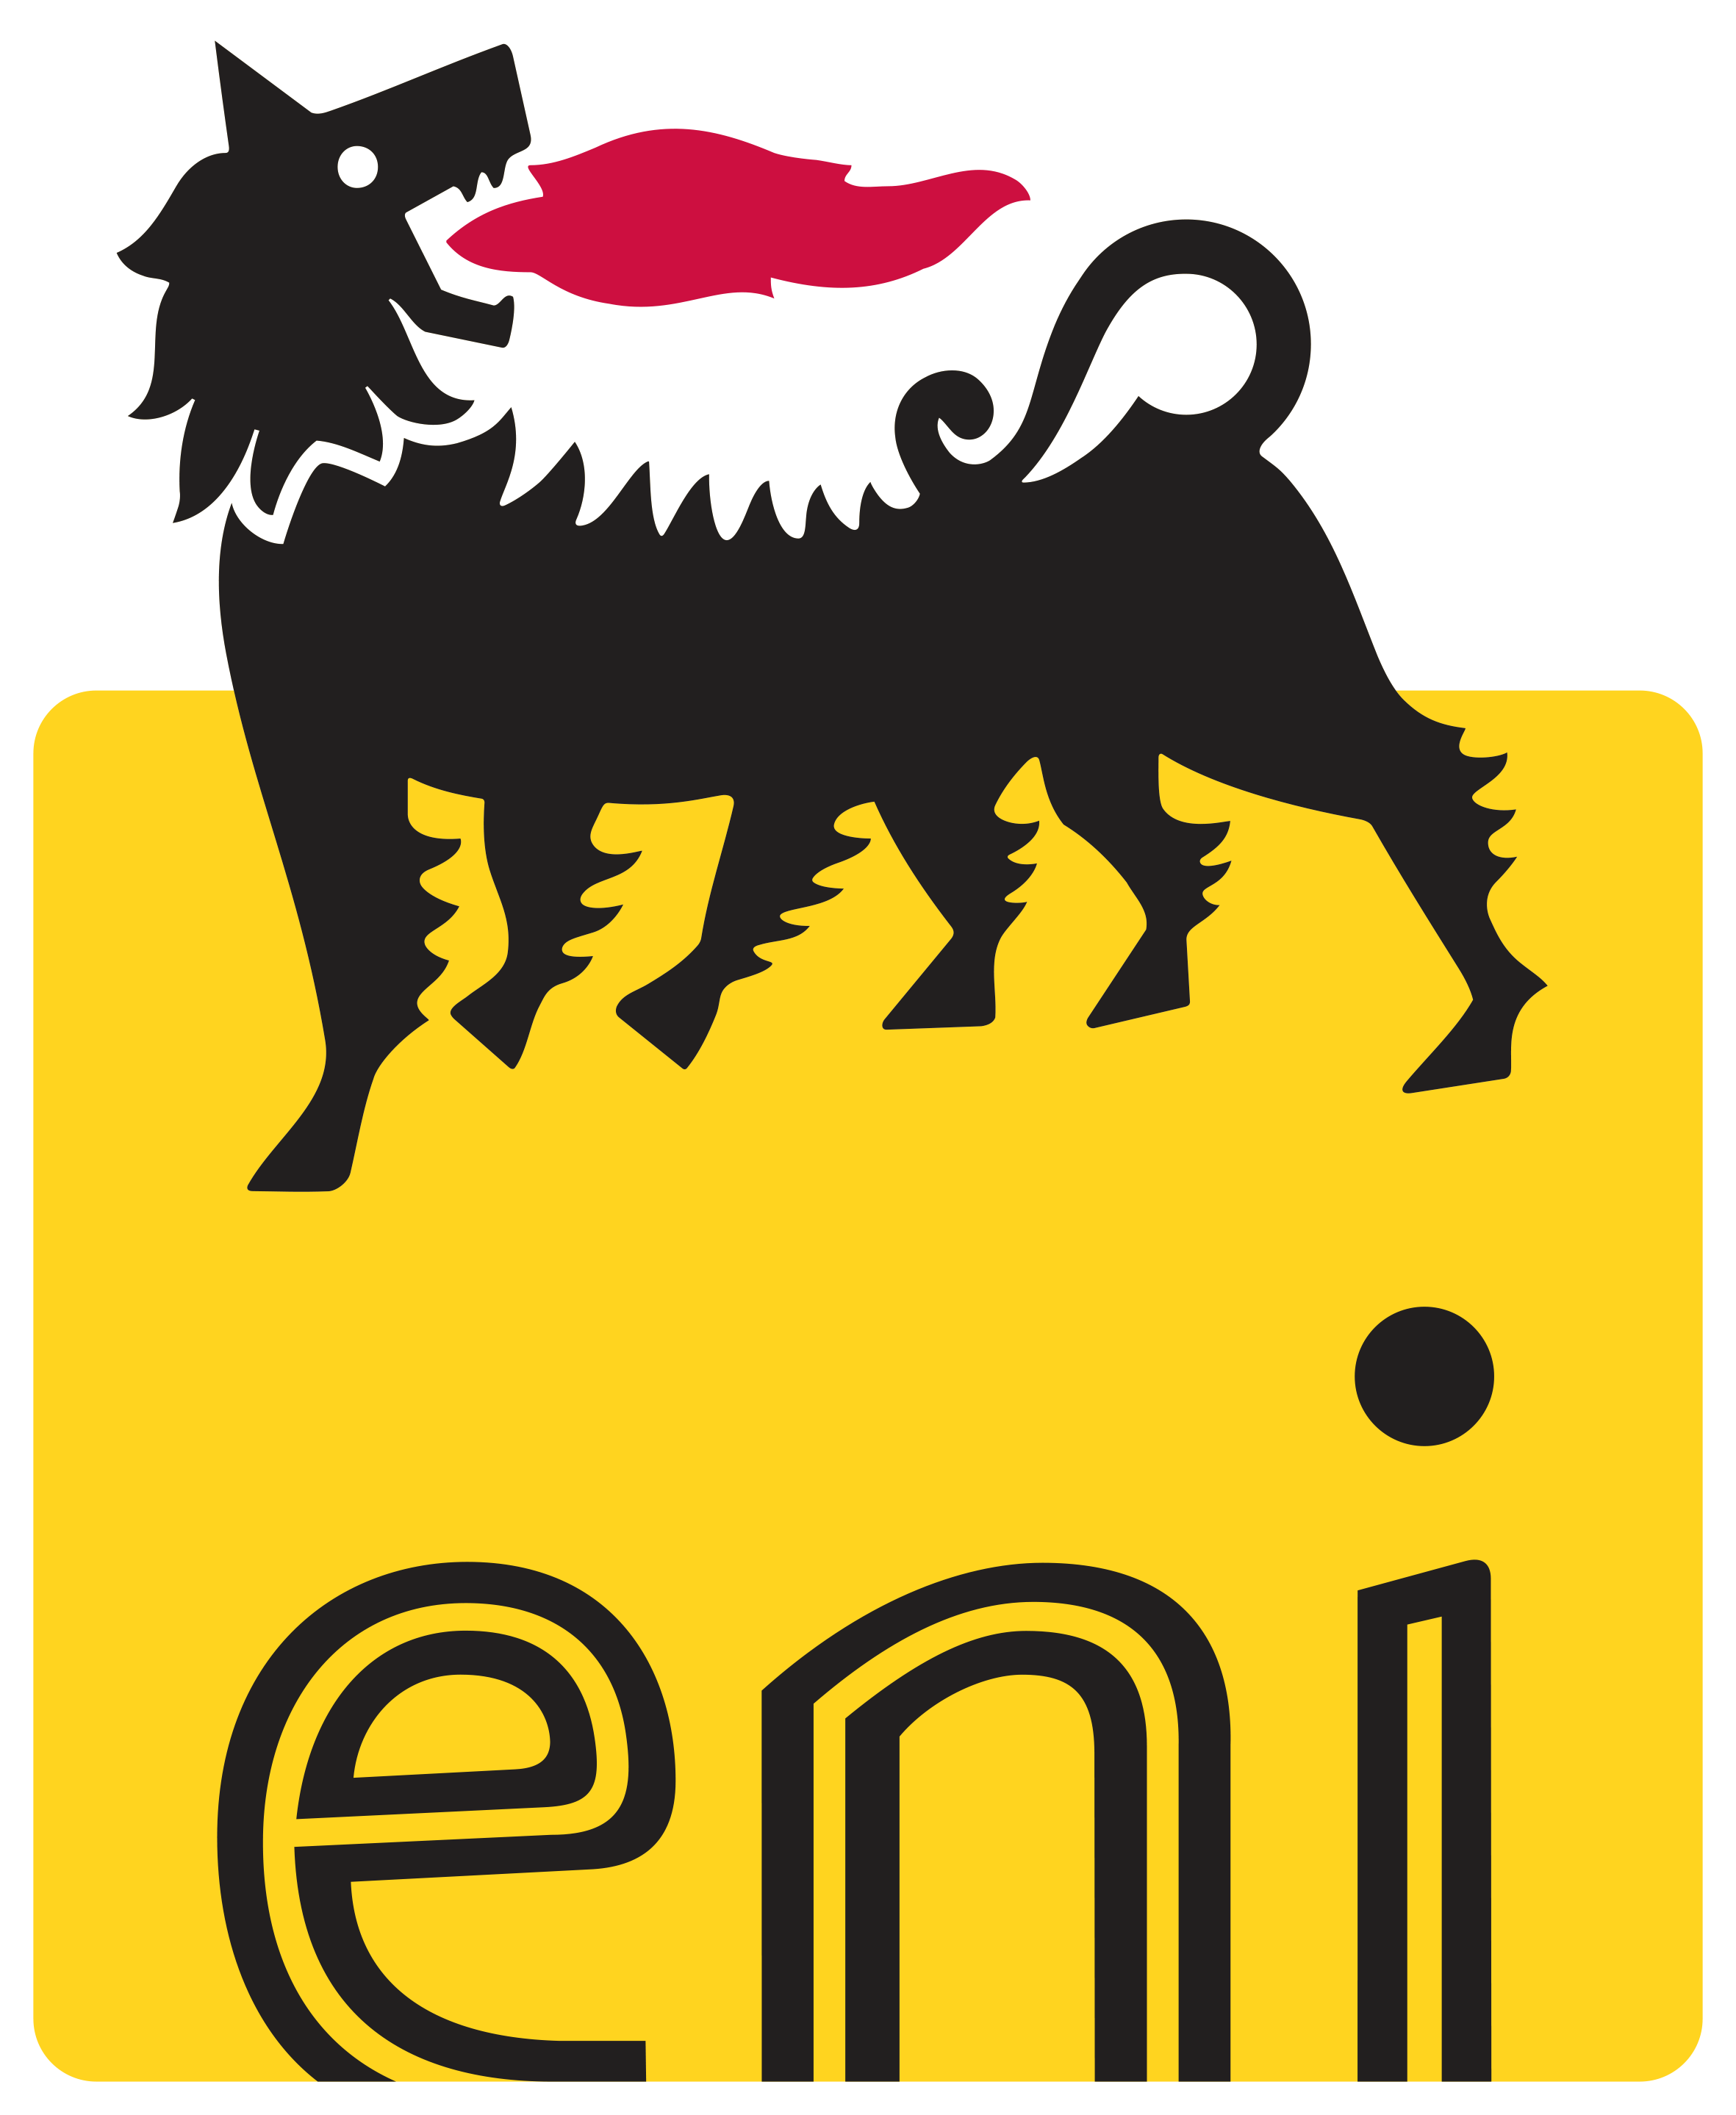 Eni Oil Indonesia Official Store